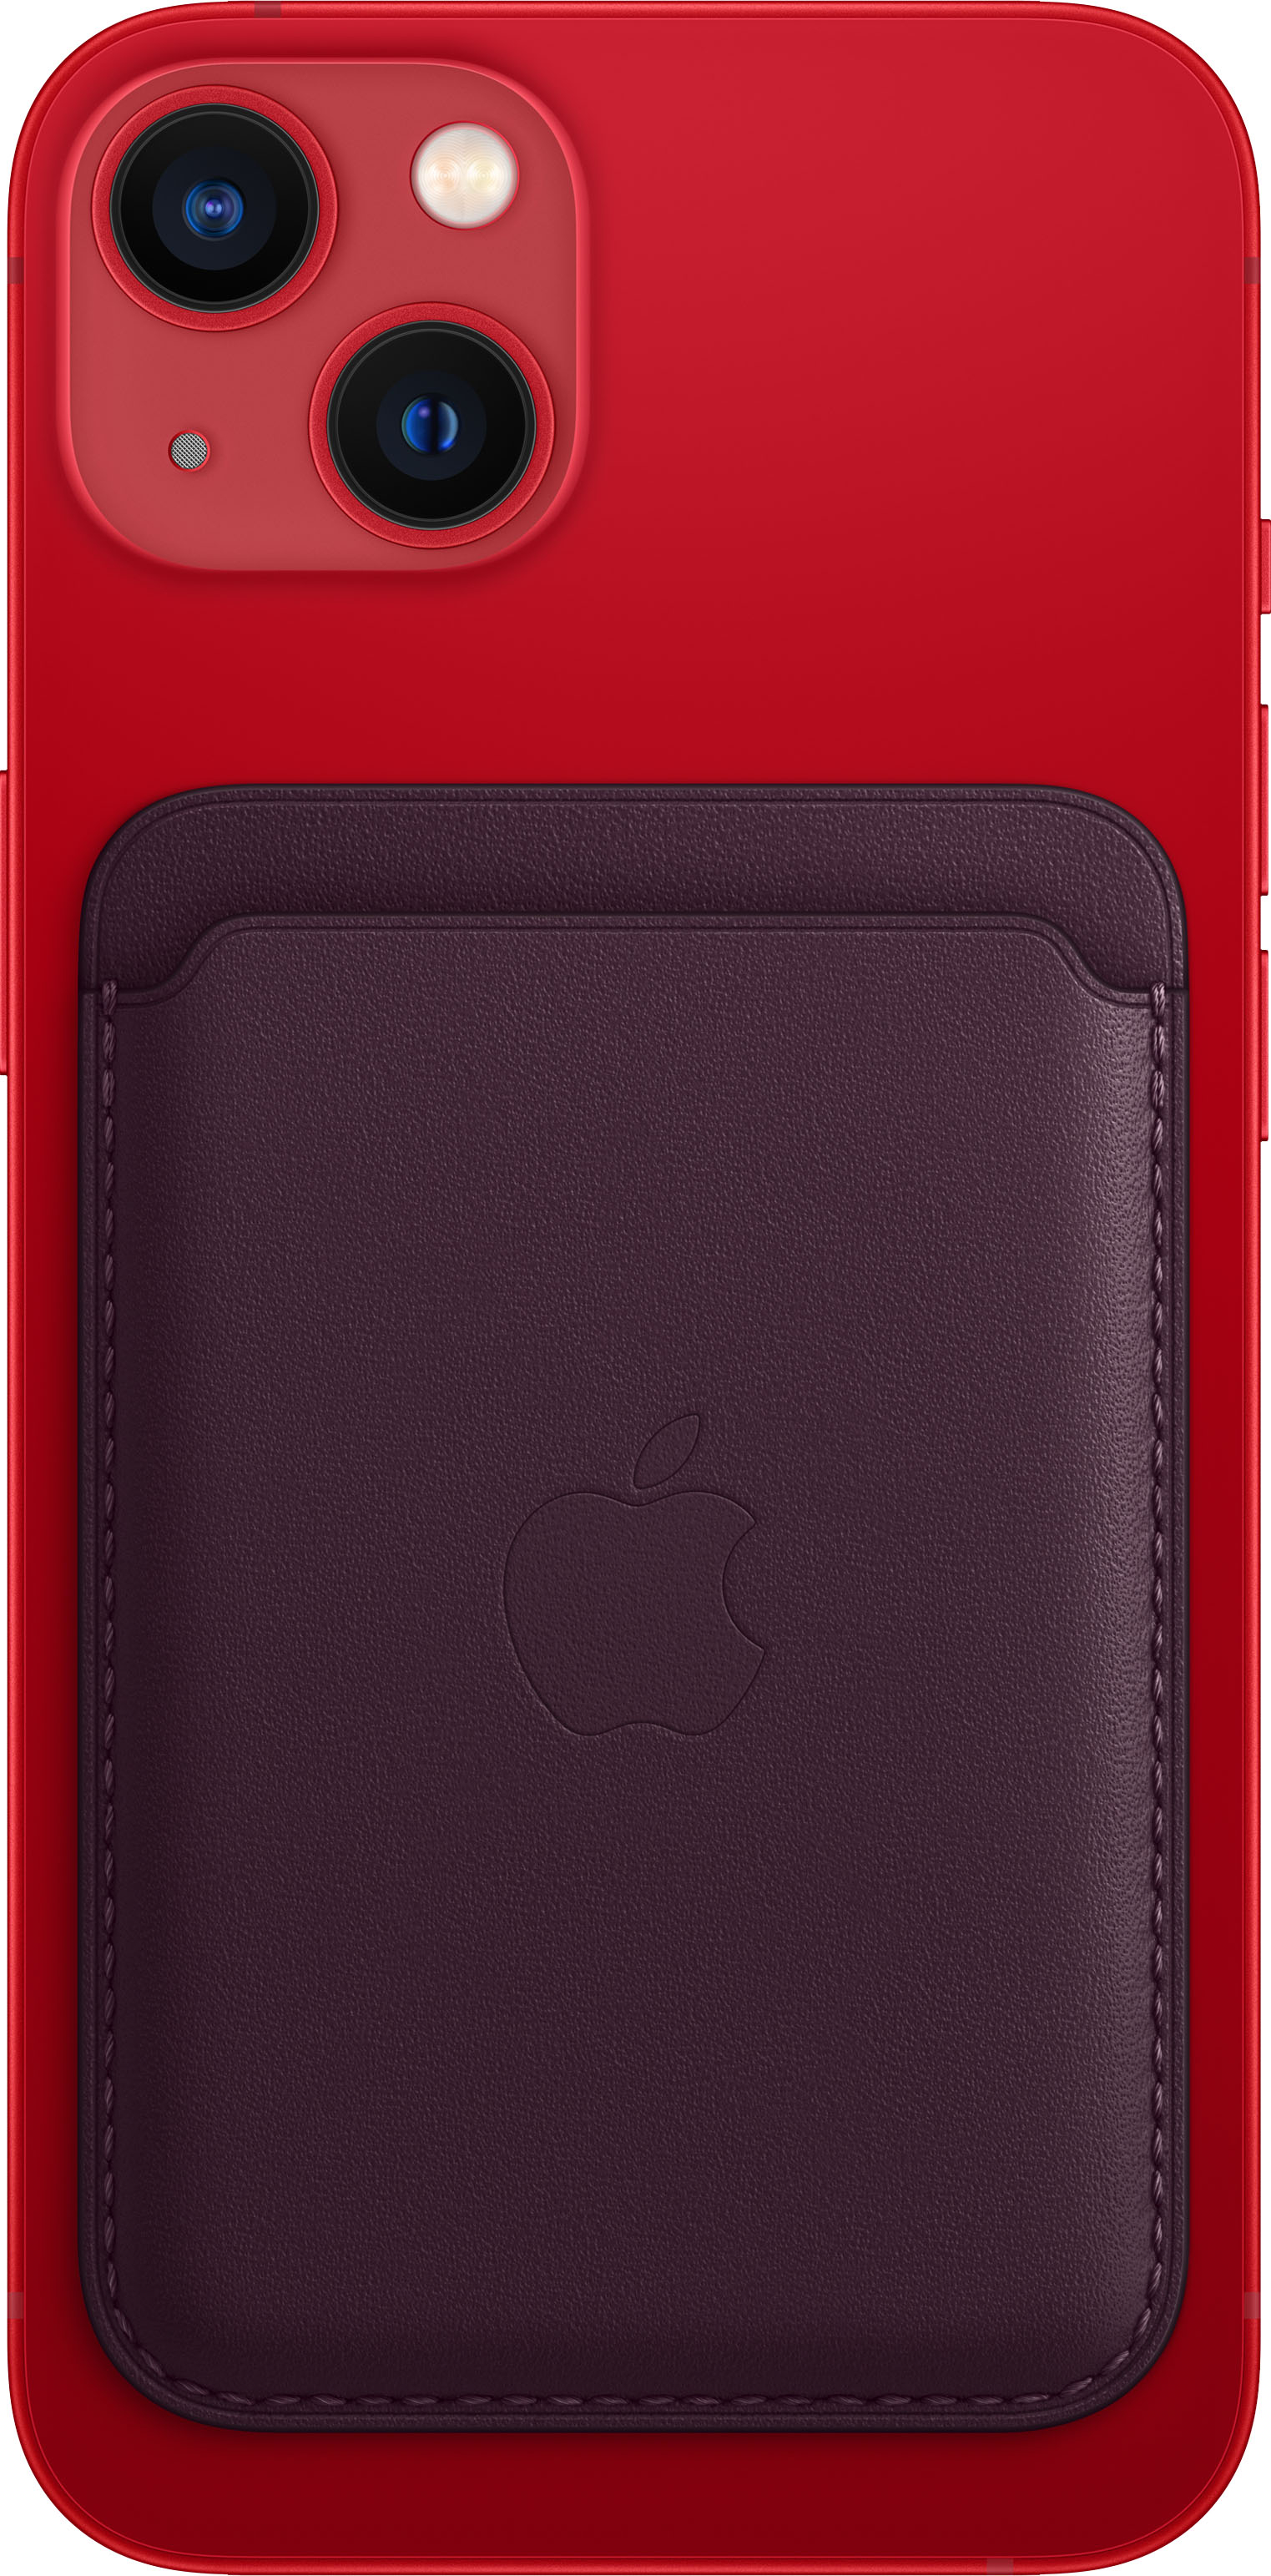 Best MagSafe Wallet for Your Apple iPhone in 2023